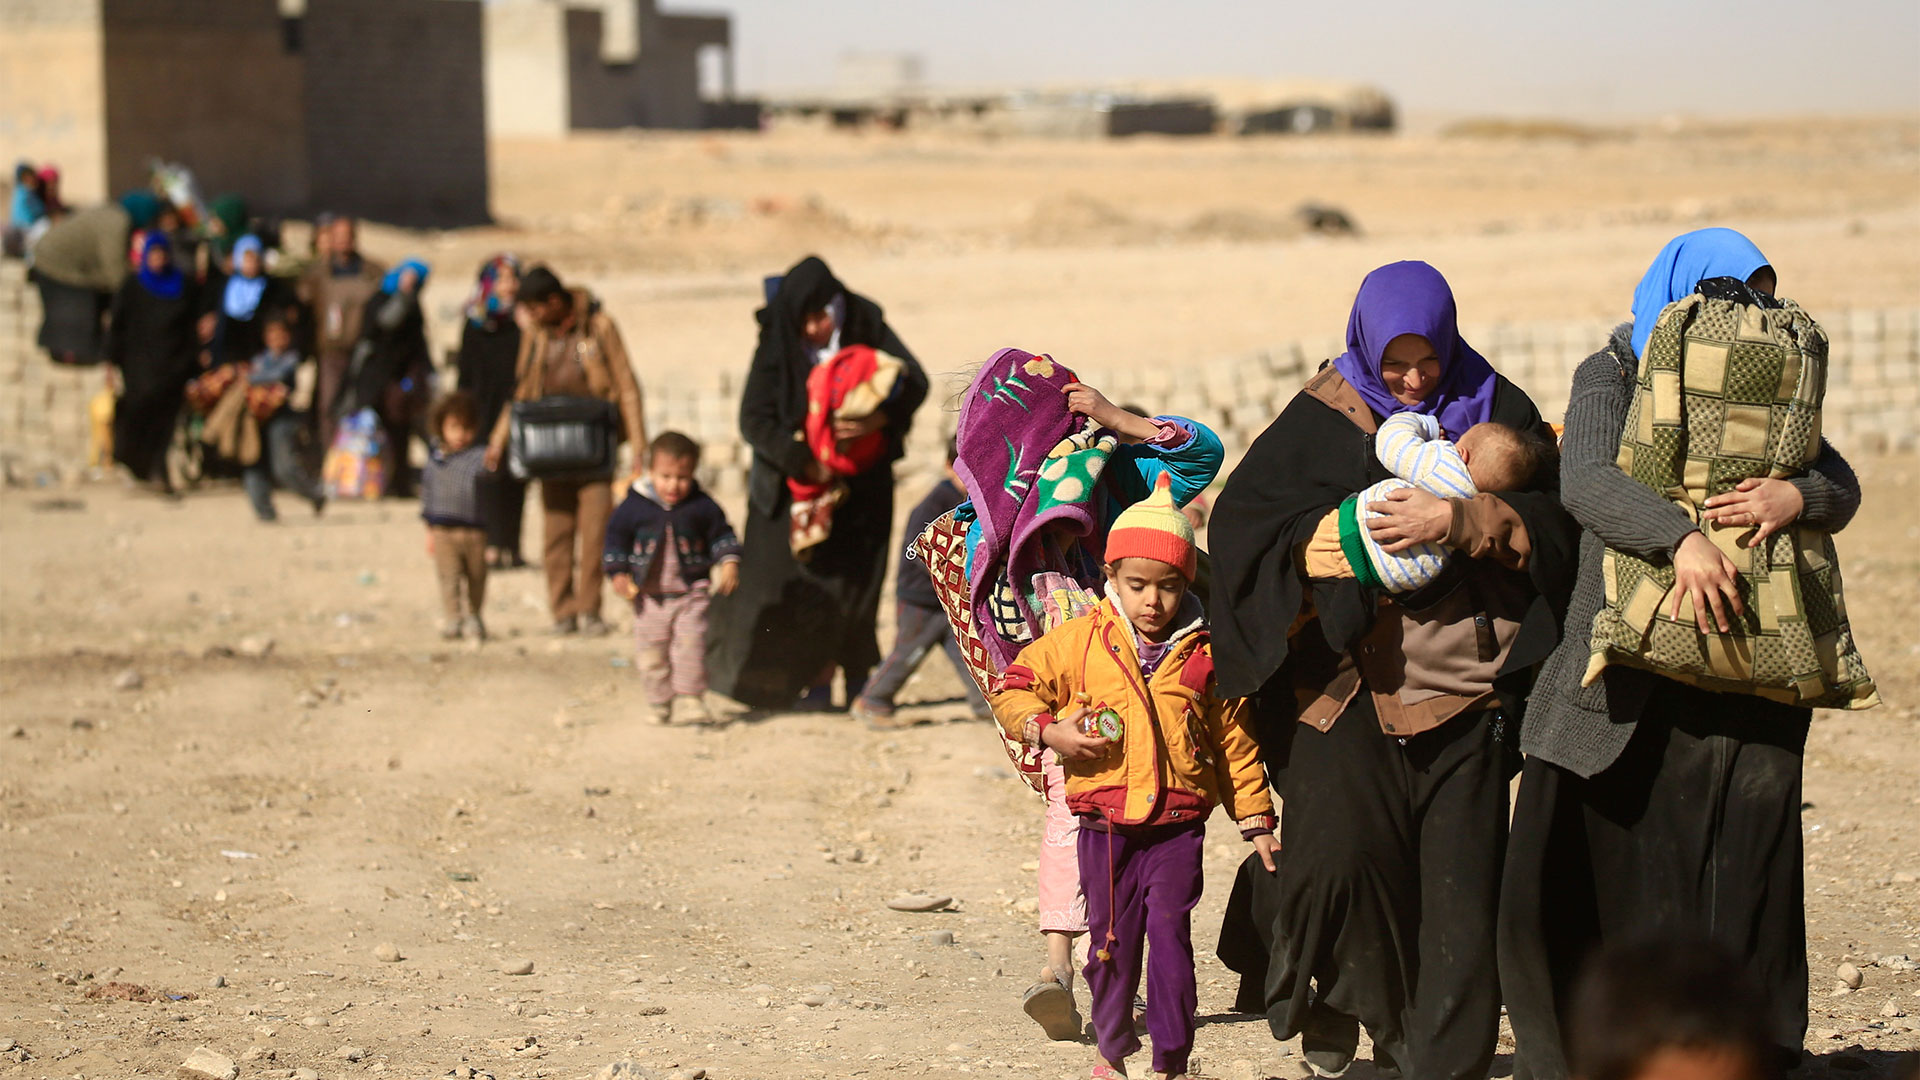 Displaced people walking in Mosul, Iraq, after fleeing from ISIS militants.